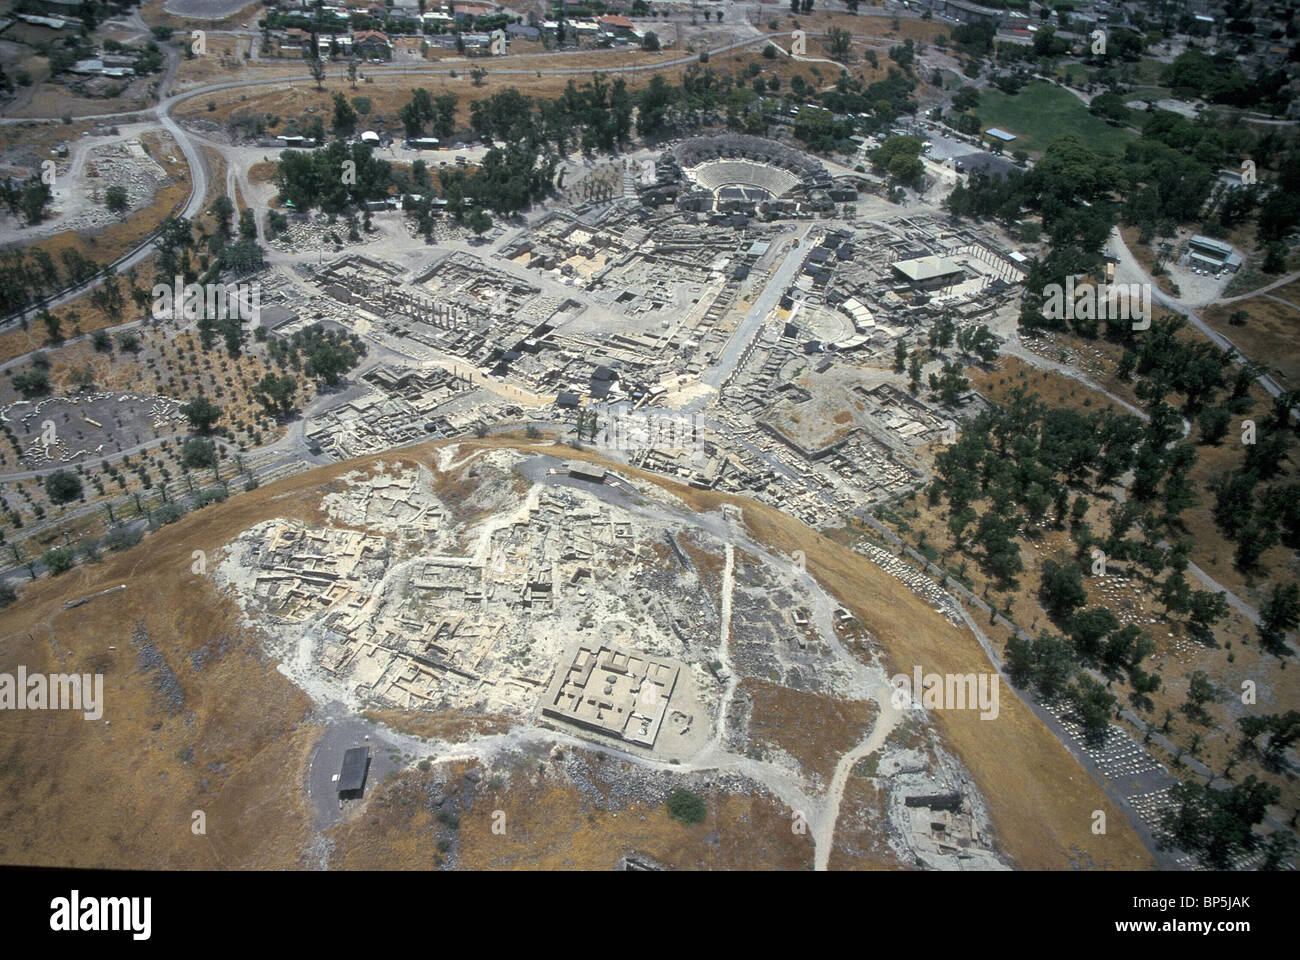 3706. BETH SHEAN - VIEW OF THE ROMAN CITY WITH THE CNAANITE TEL IN THE FOREGROUND Stock Photo